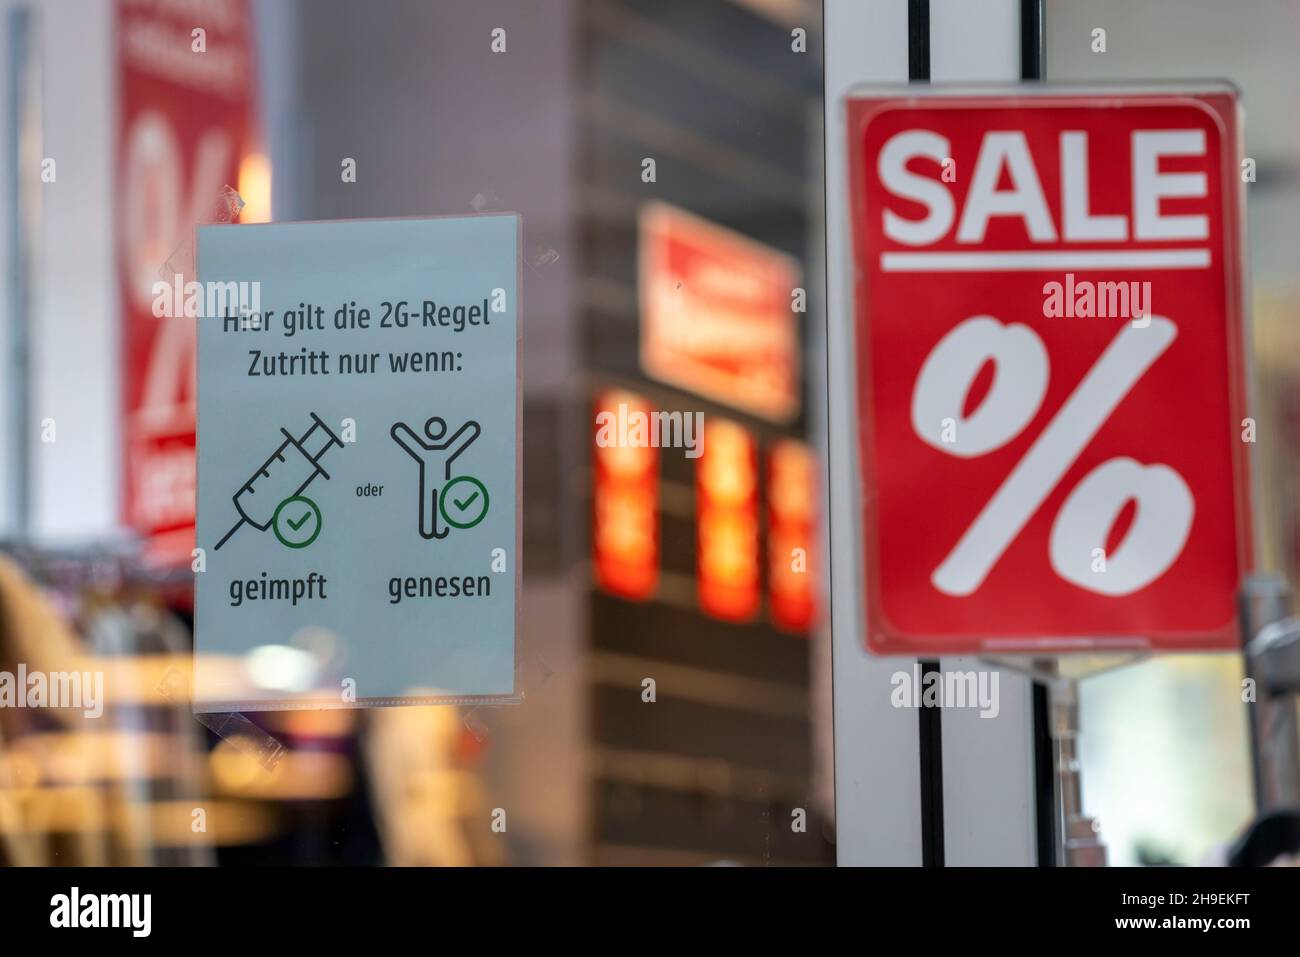 Shop in the city, Königsstrasse, during the fourth Corona wave, 2G regulation, signs, in Duisburg, NRW, Germany, Stock Photo